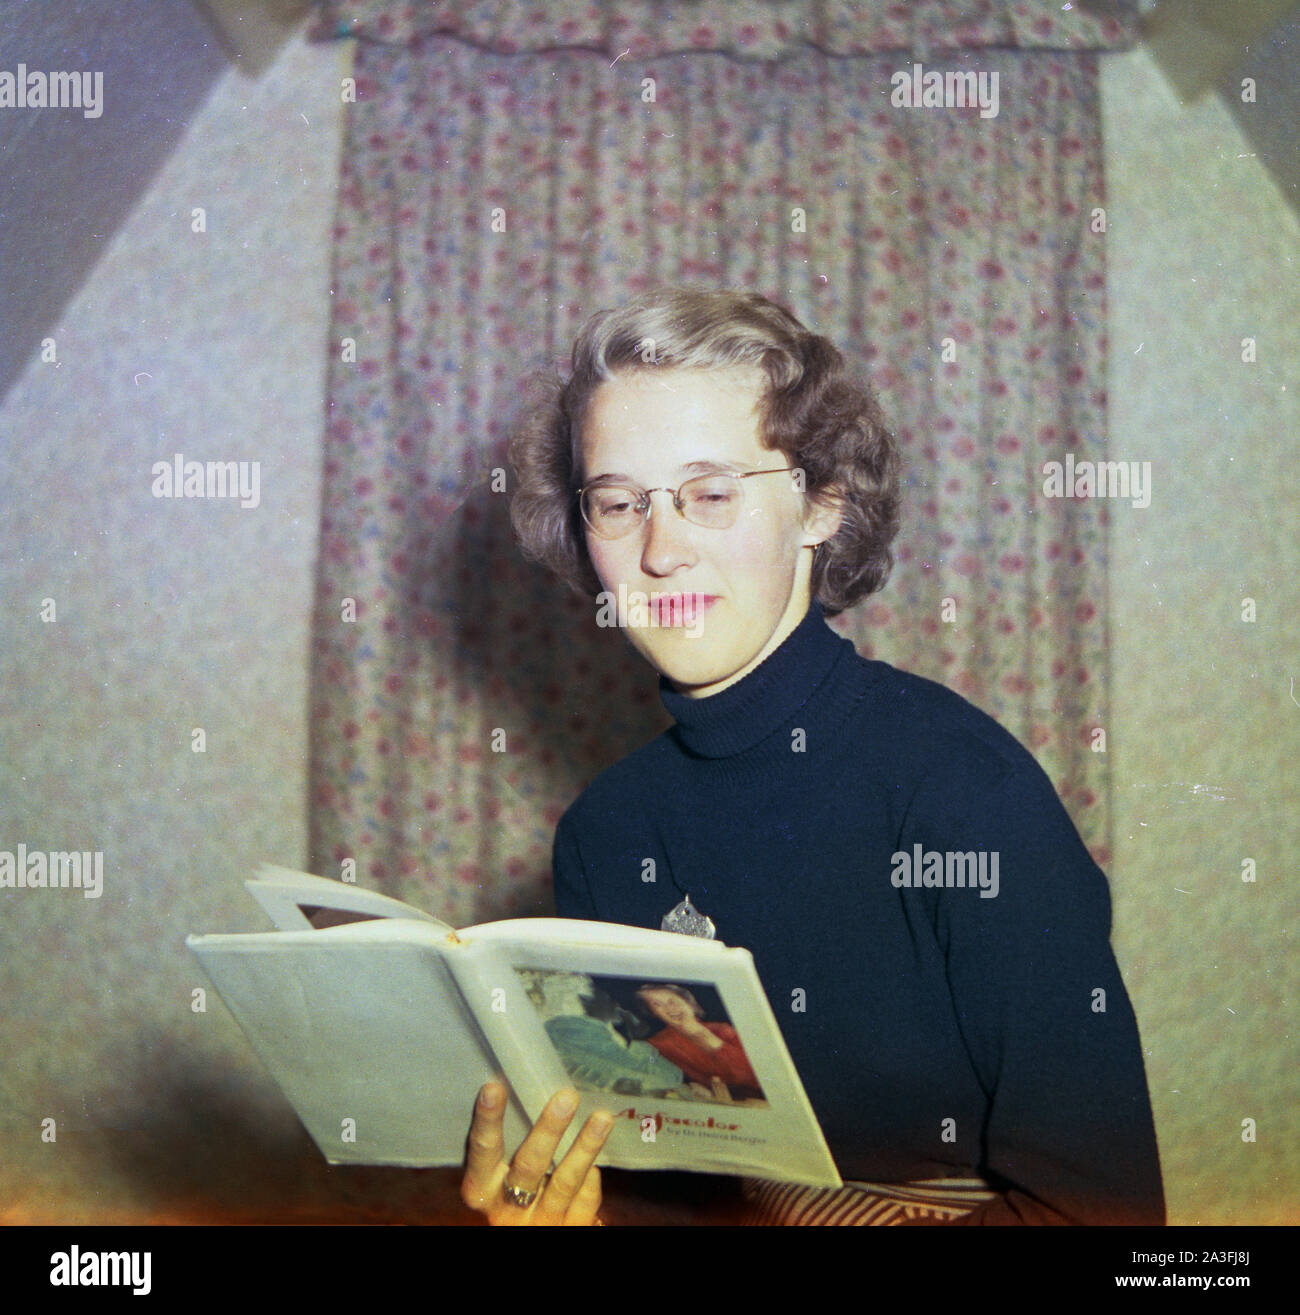 1953, historical, an Elegant looking English lady wearing a blue, woollen roll-neck top and glasses inside a room reading a reference book about Agfacolor by Agfa technician Dr. Heninz Berger. Agfacolor was the name of a series of color film products made by Agfa of Germany and the book was an english translation. Founded in Berlin in 1860s, Agfa entered the field of photograhy in 1898. Stock Photo